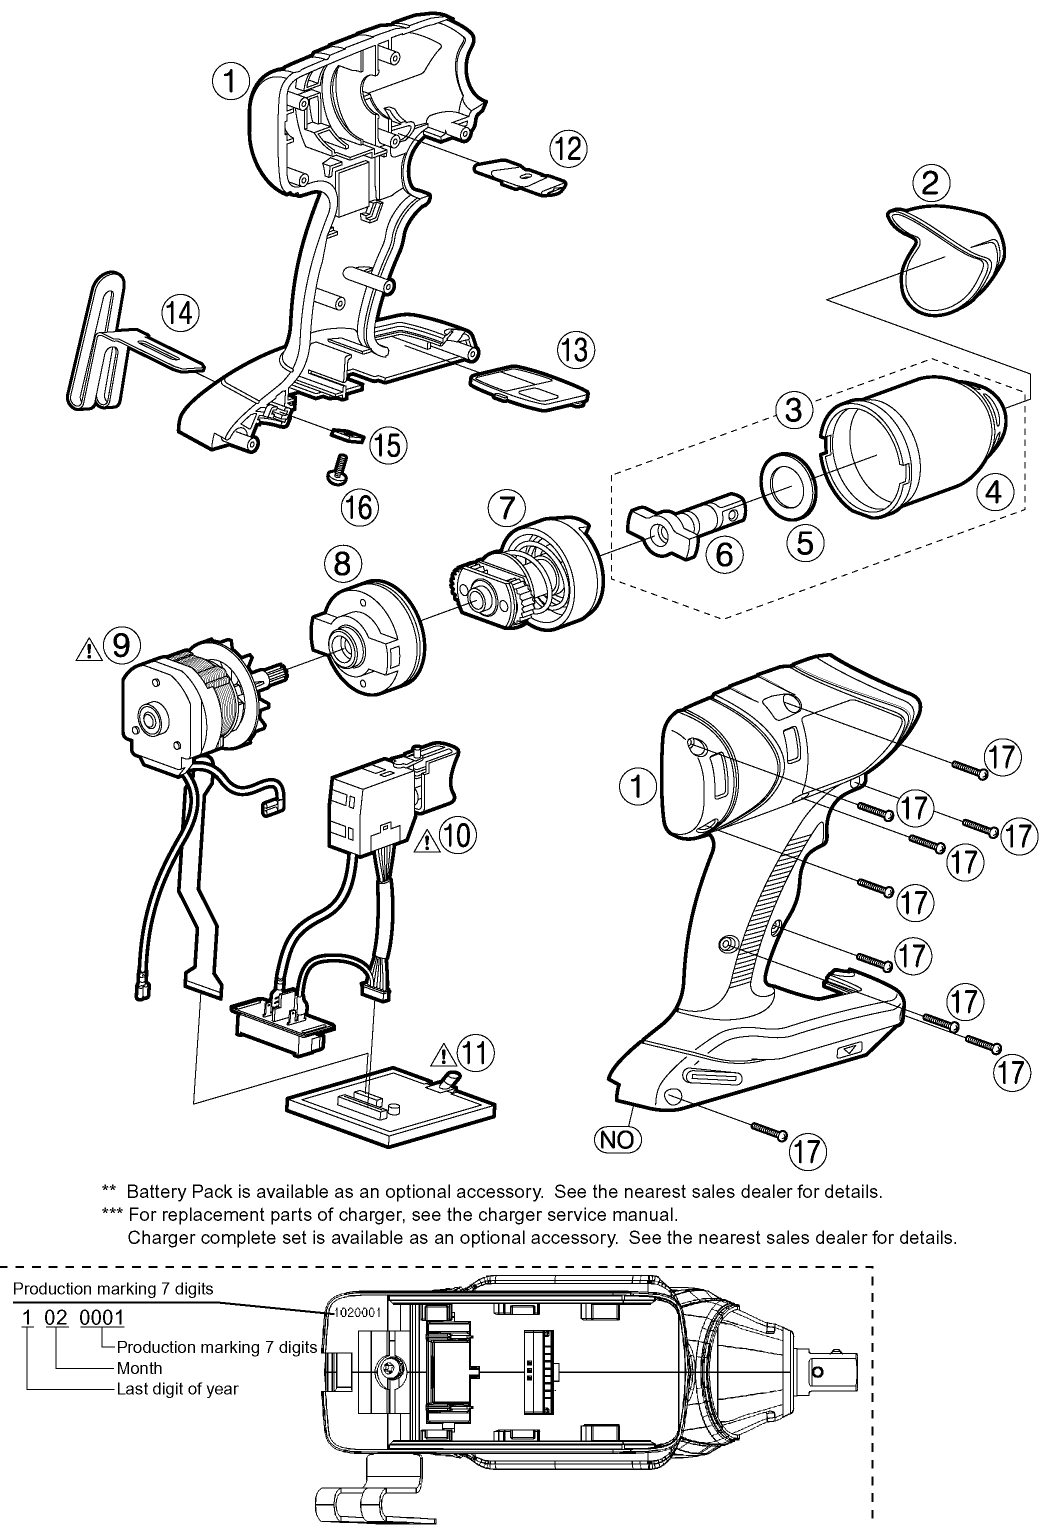 EY7547: Exploded View